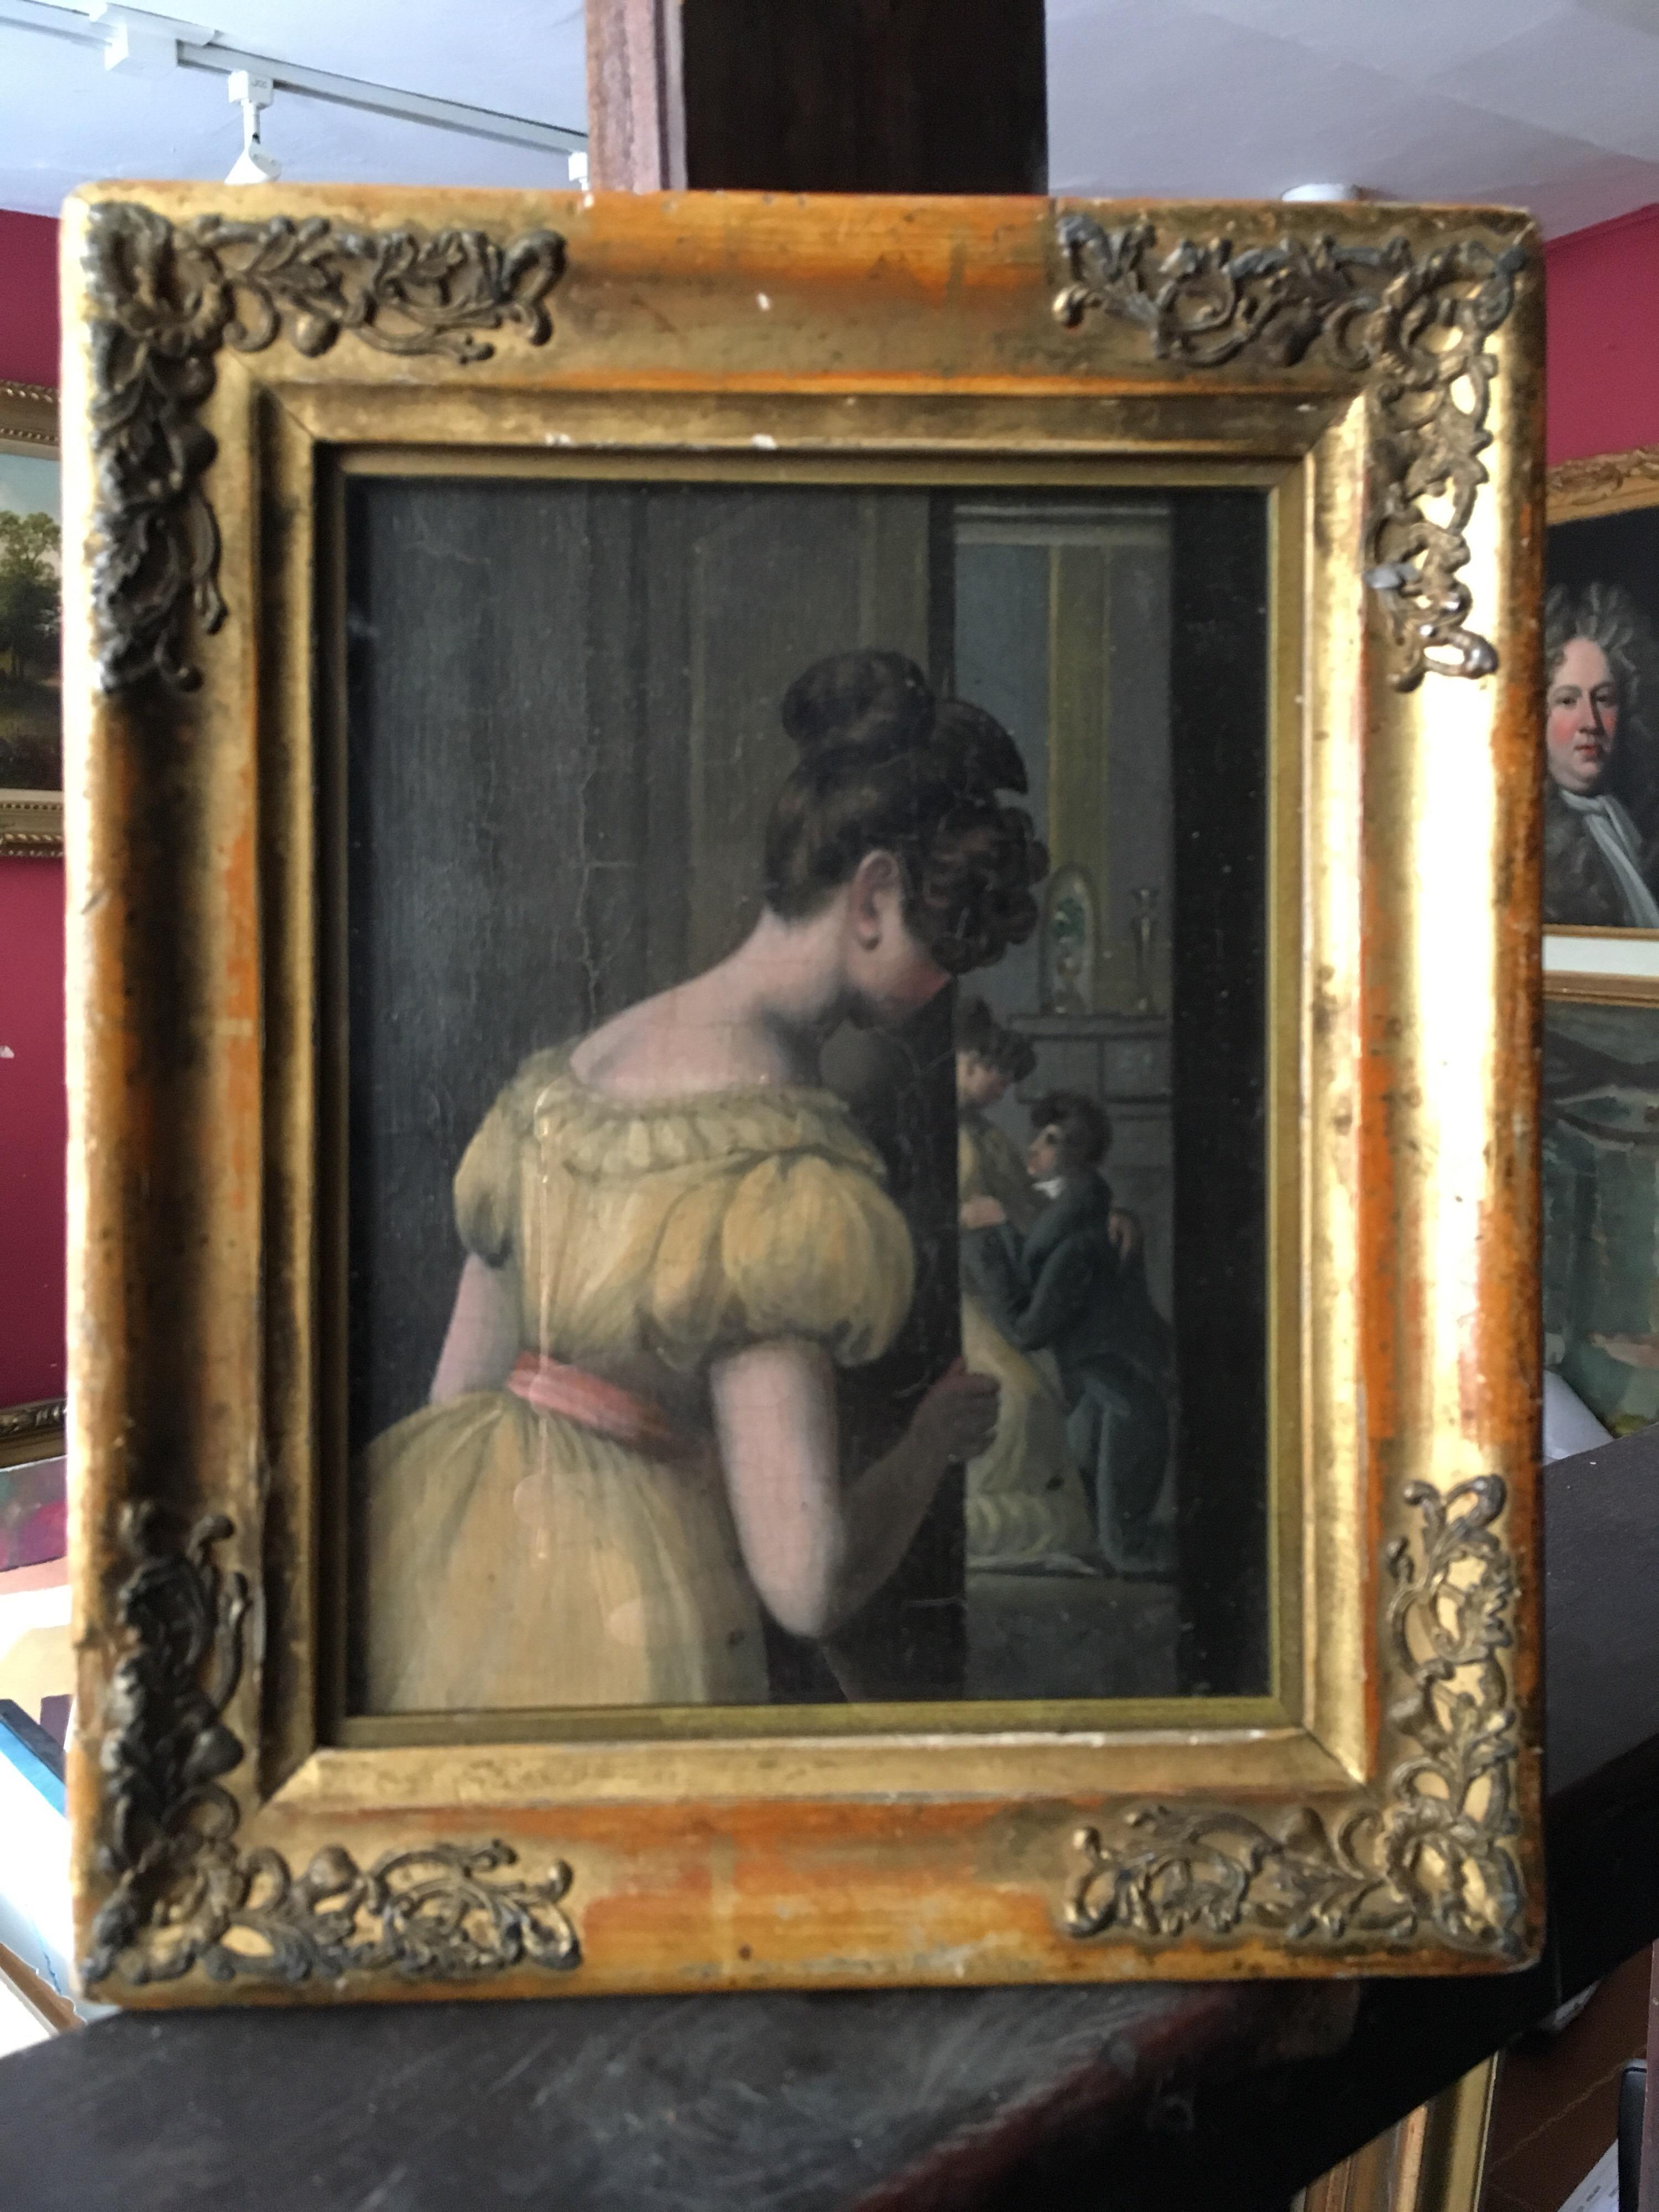 ‘Caught in the Act’, British Oil Painting
circa 1800
The artist has titled the painting verso
Oil painting on wood panel, framed
Frame size: 9 x 7.5 inches

Scandalous oil painting of a smartly dressed young woman from the Georgian era, watching two